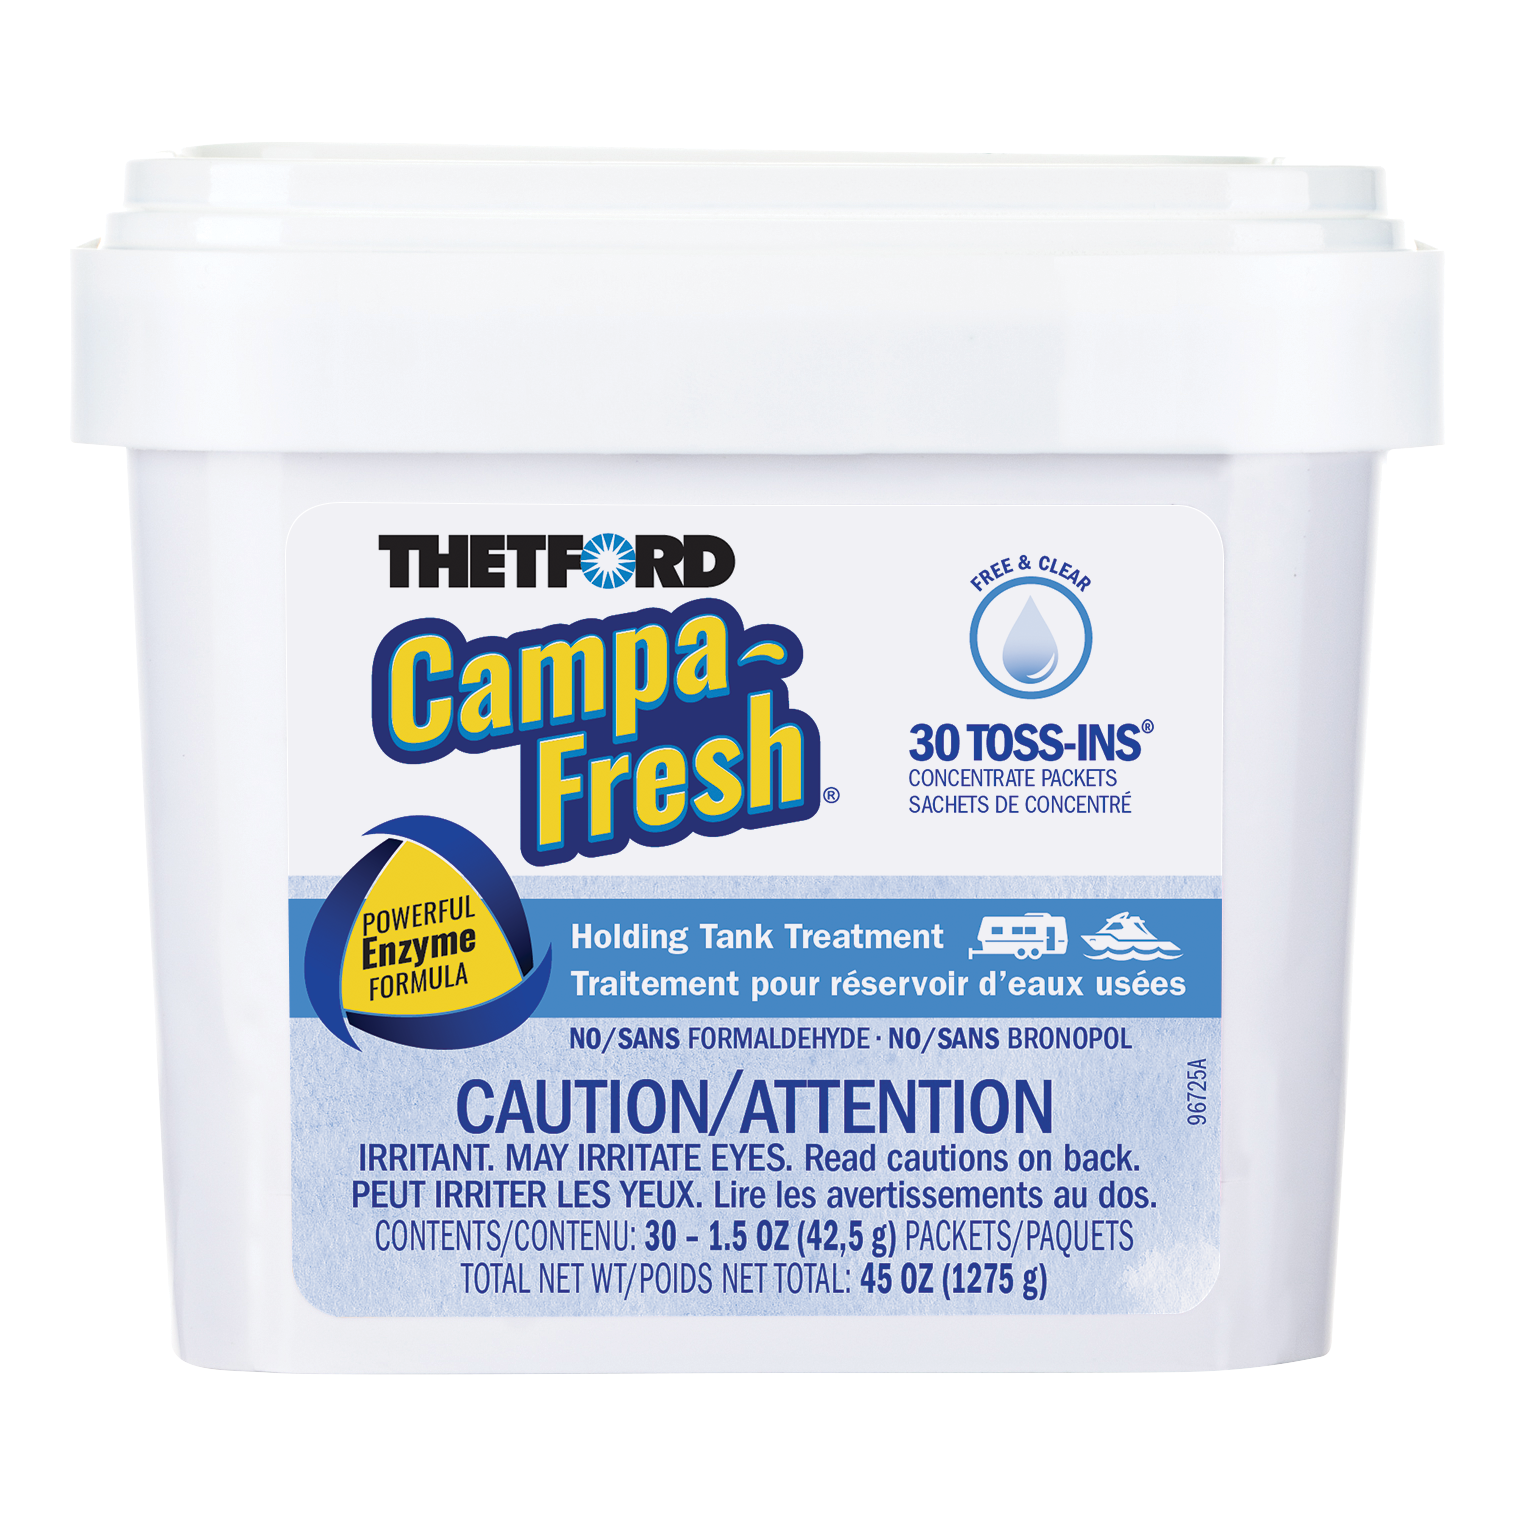 Thetford Campa-Fresh Free and Clear Liquid Holding Tank Treatment, 8 oz,  Pack of 6 